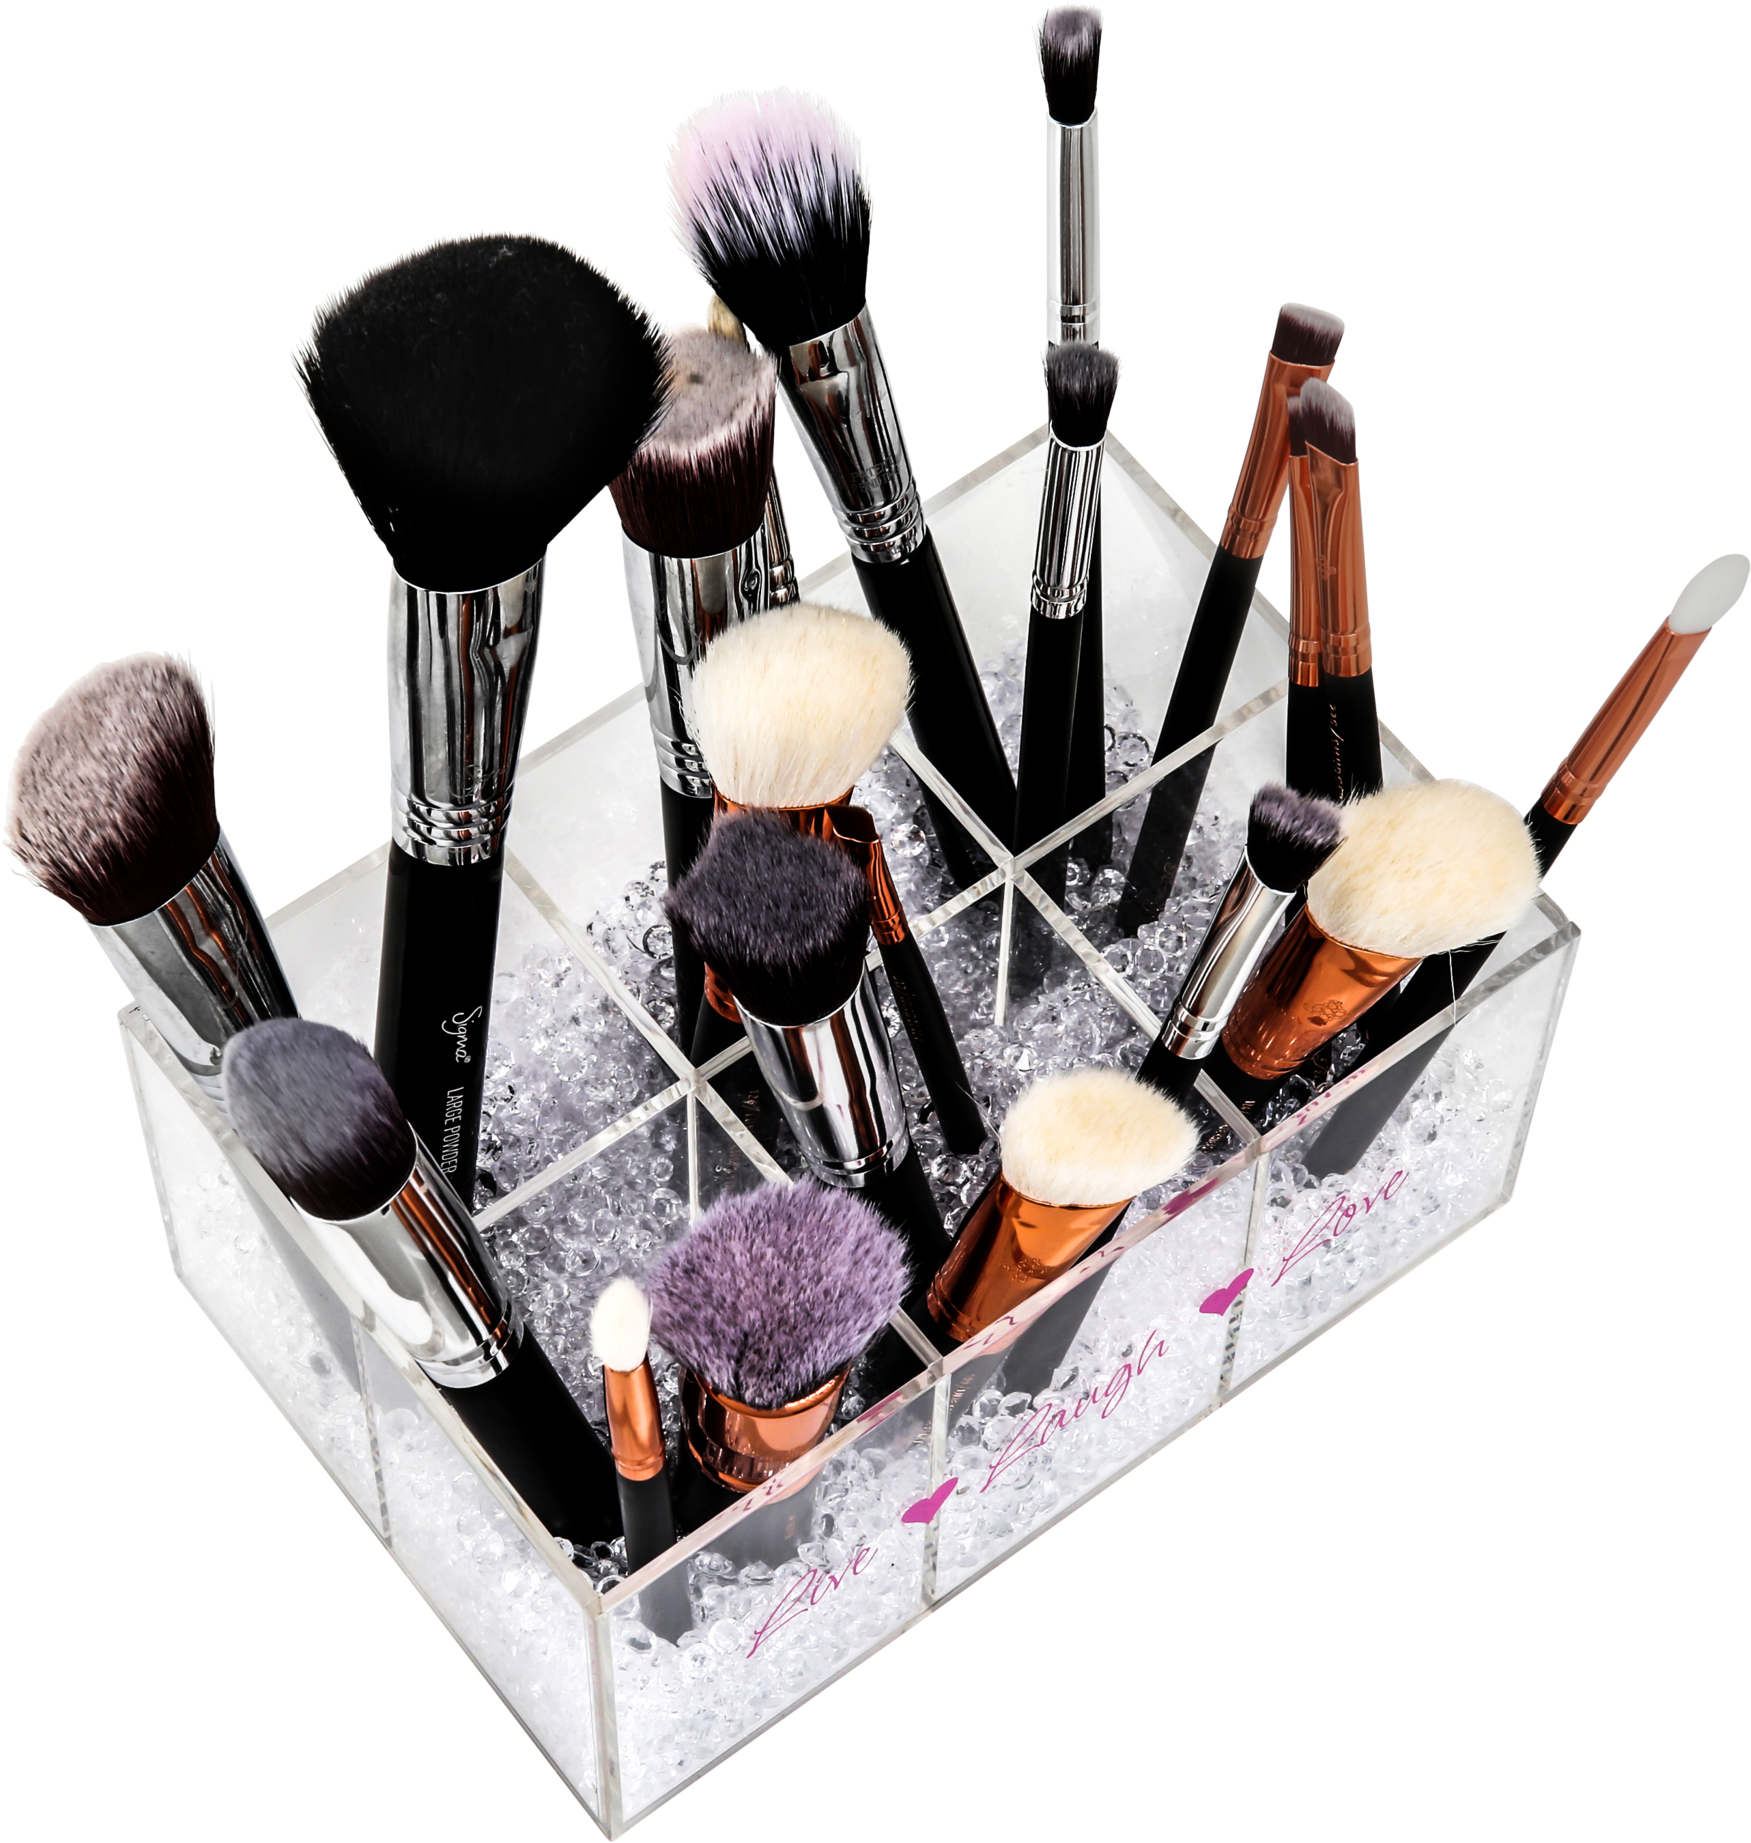 A Group Of Makeup Brushes In A Clear Container